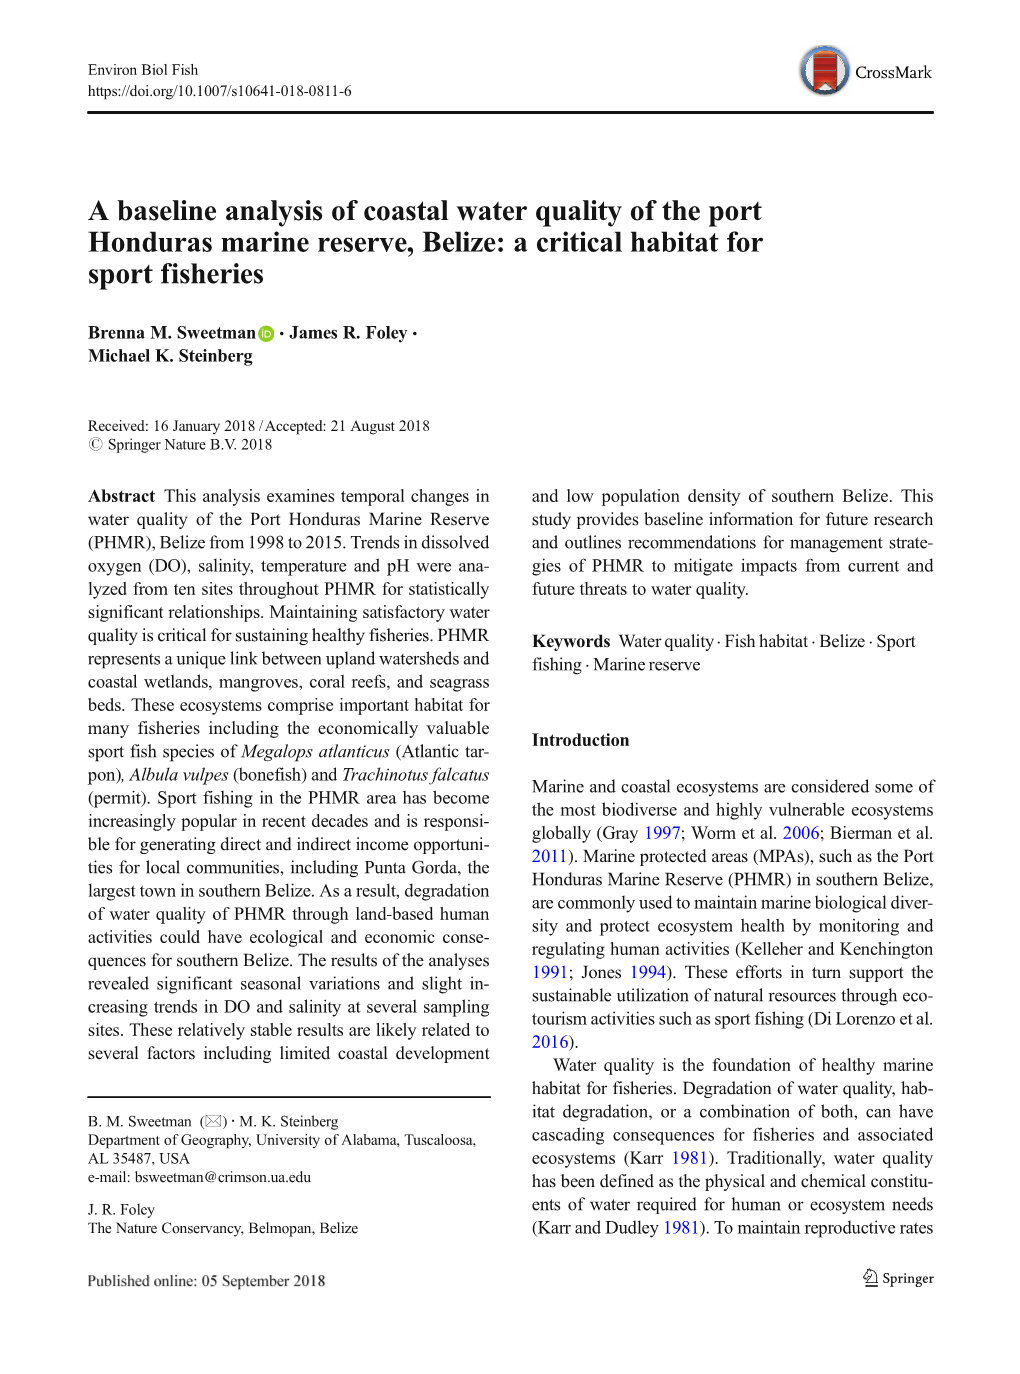 A Baseline Analysis of Coastal Water Quality of the Port Honduras Marine Reserve, Belize: a Critical Habitat for Sport Fisheries